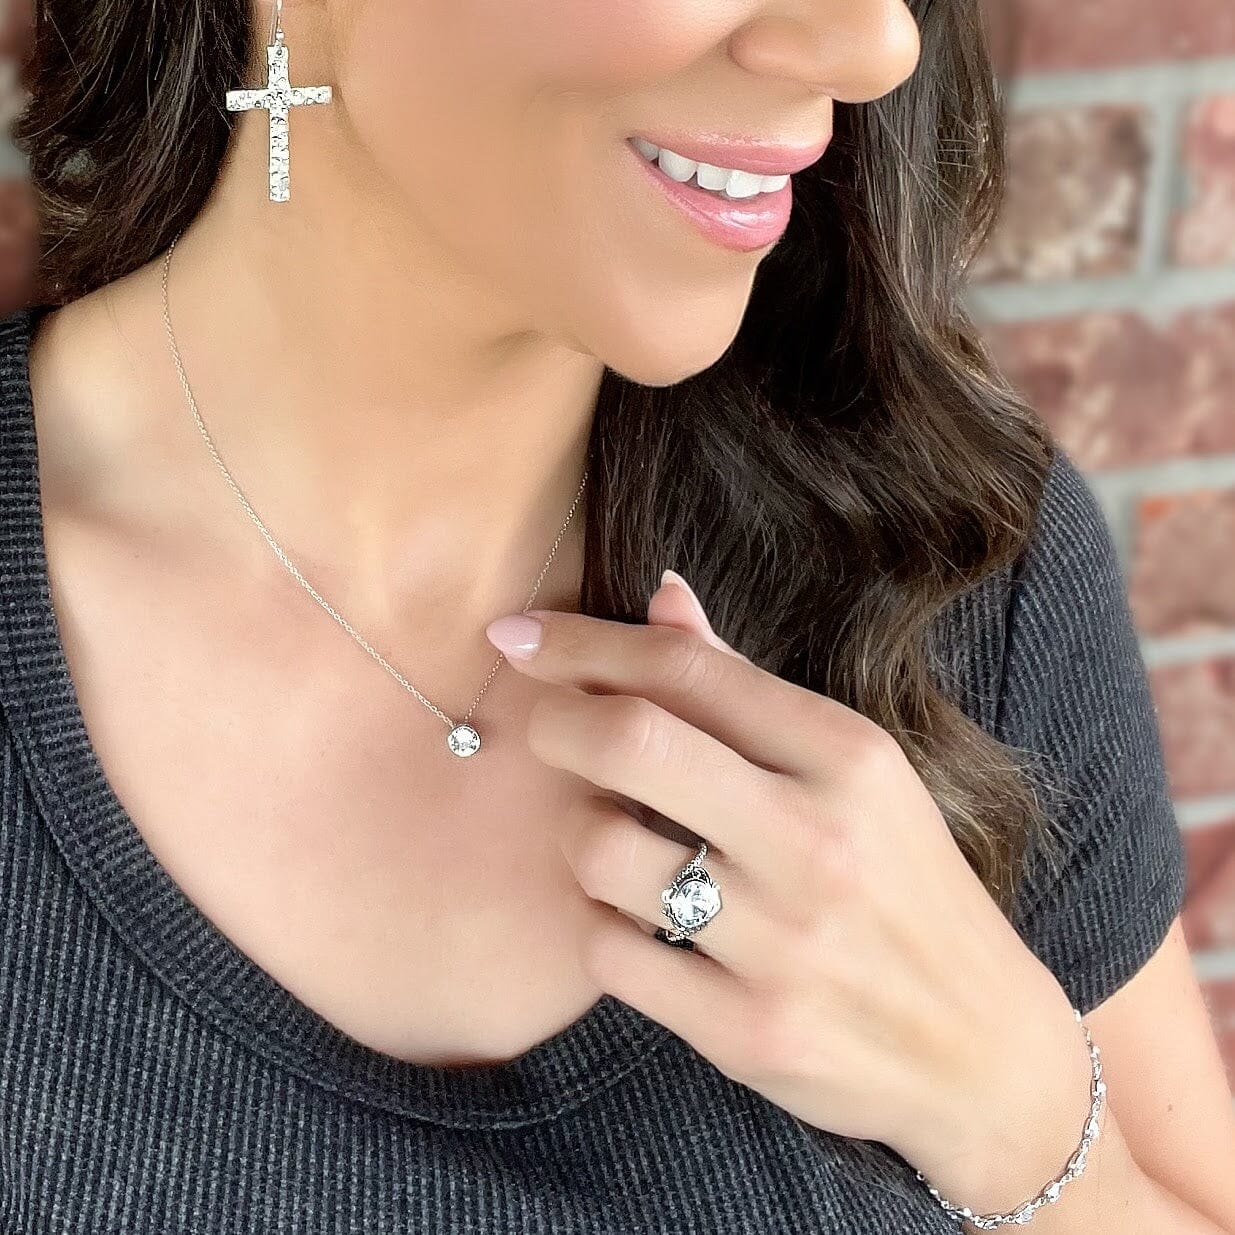 Du Jour Ring paired with Cherished One Earrings, Be brilliant Necklace, and Set to Sparkle Bracelet